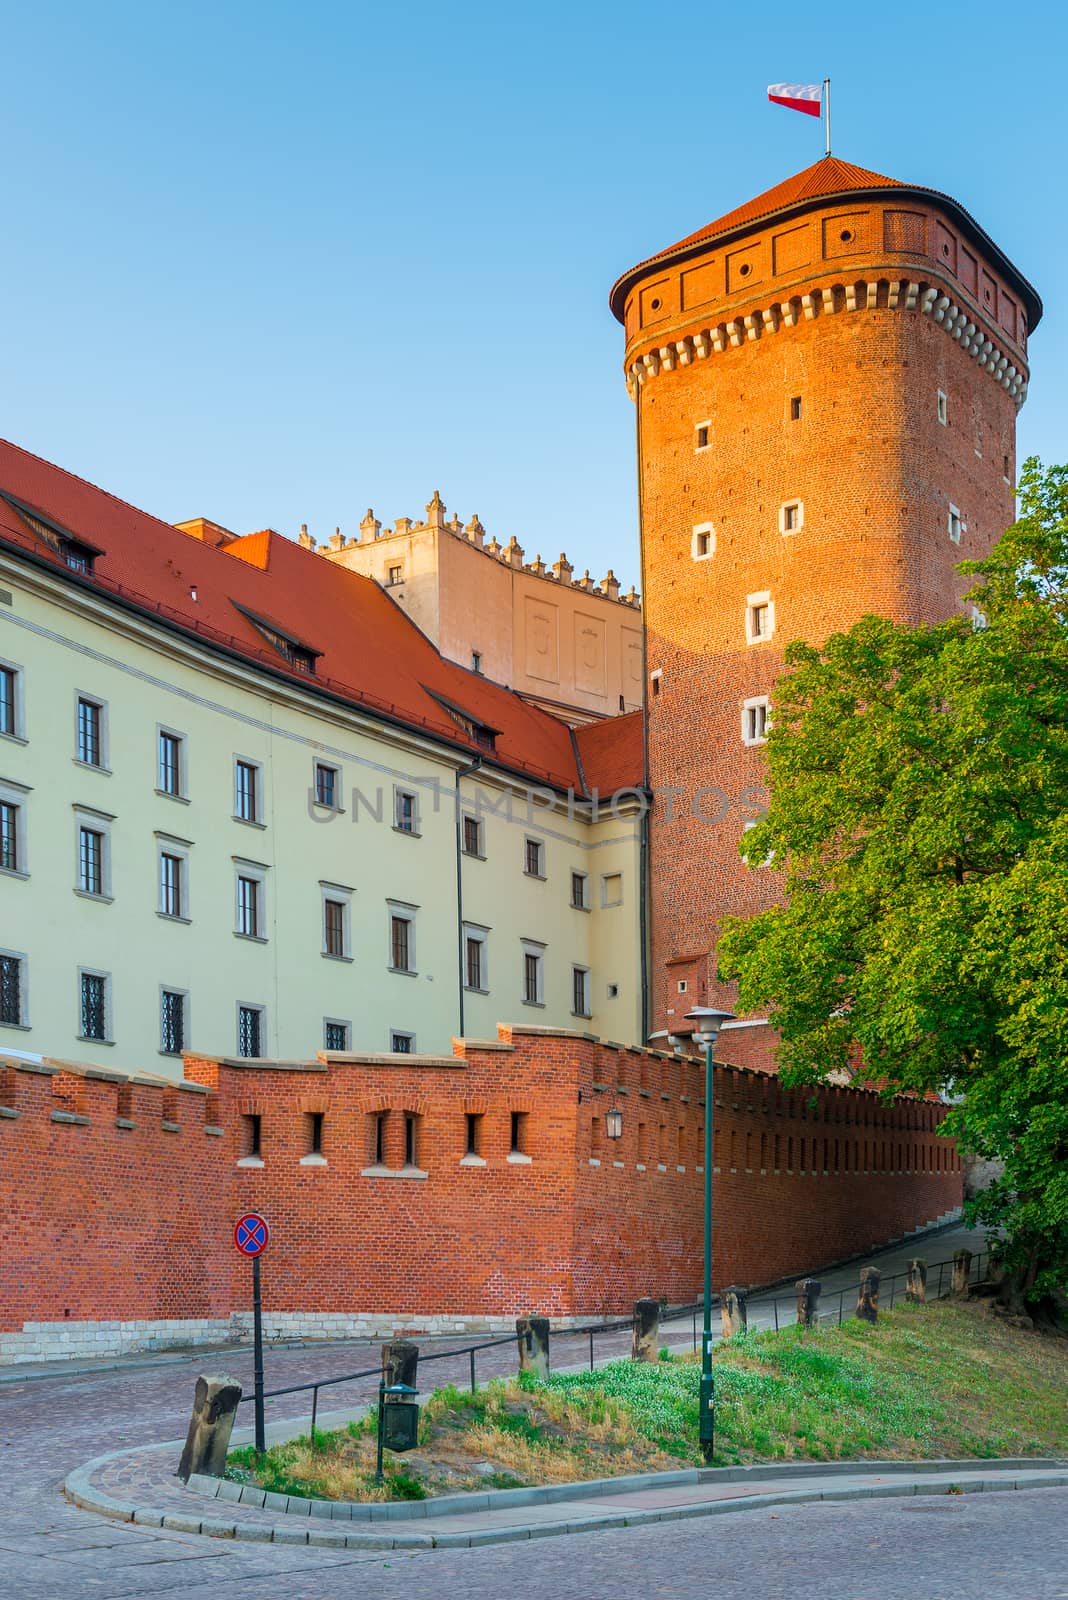 Wawel Castle is located on a hill at an altitude of 228 meters on the bank of the Vistula River in Krakow. From the 11th to the beginning of the 17th century, the Wawel Castle was the residence of Polish kings and was the center of the country's spiritual and political power.